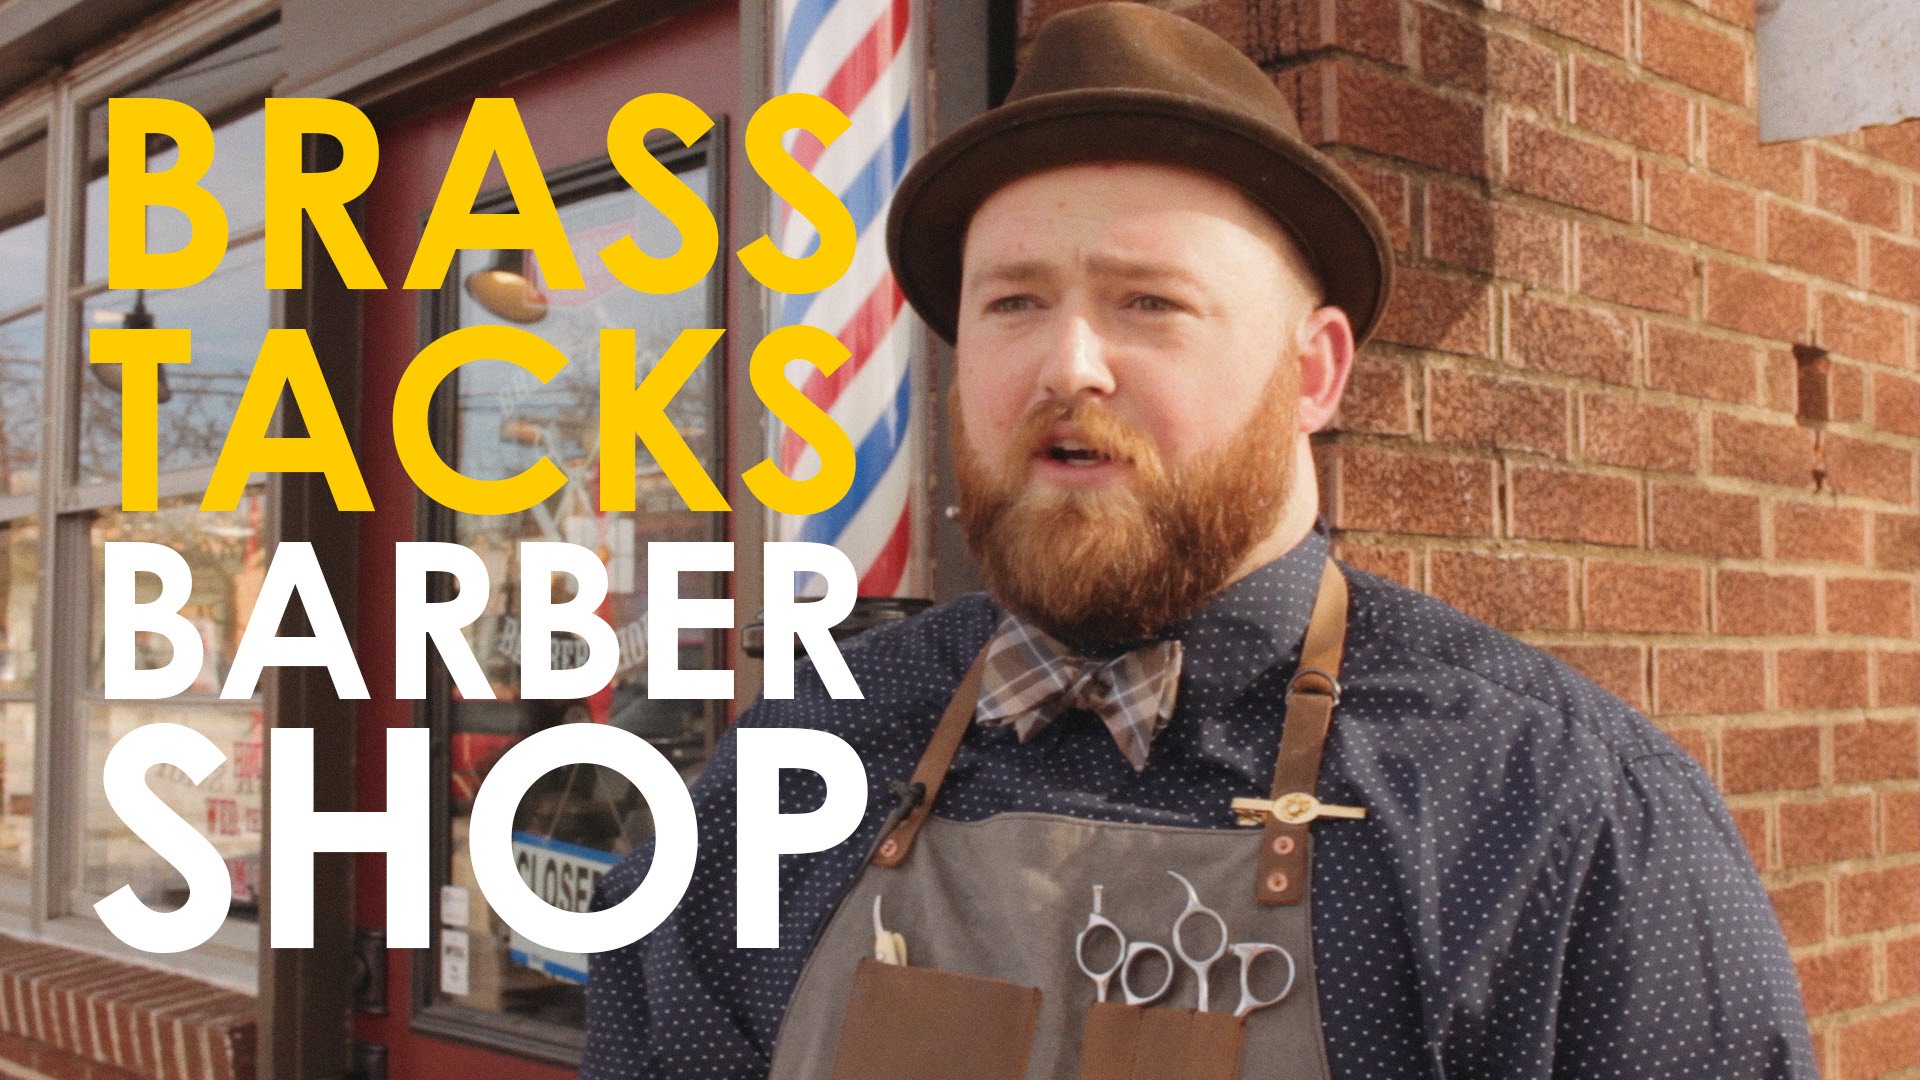 Barber shop specializing in *haircuts* and shaves.